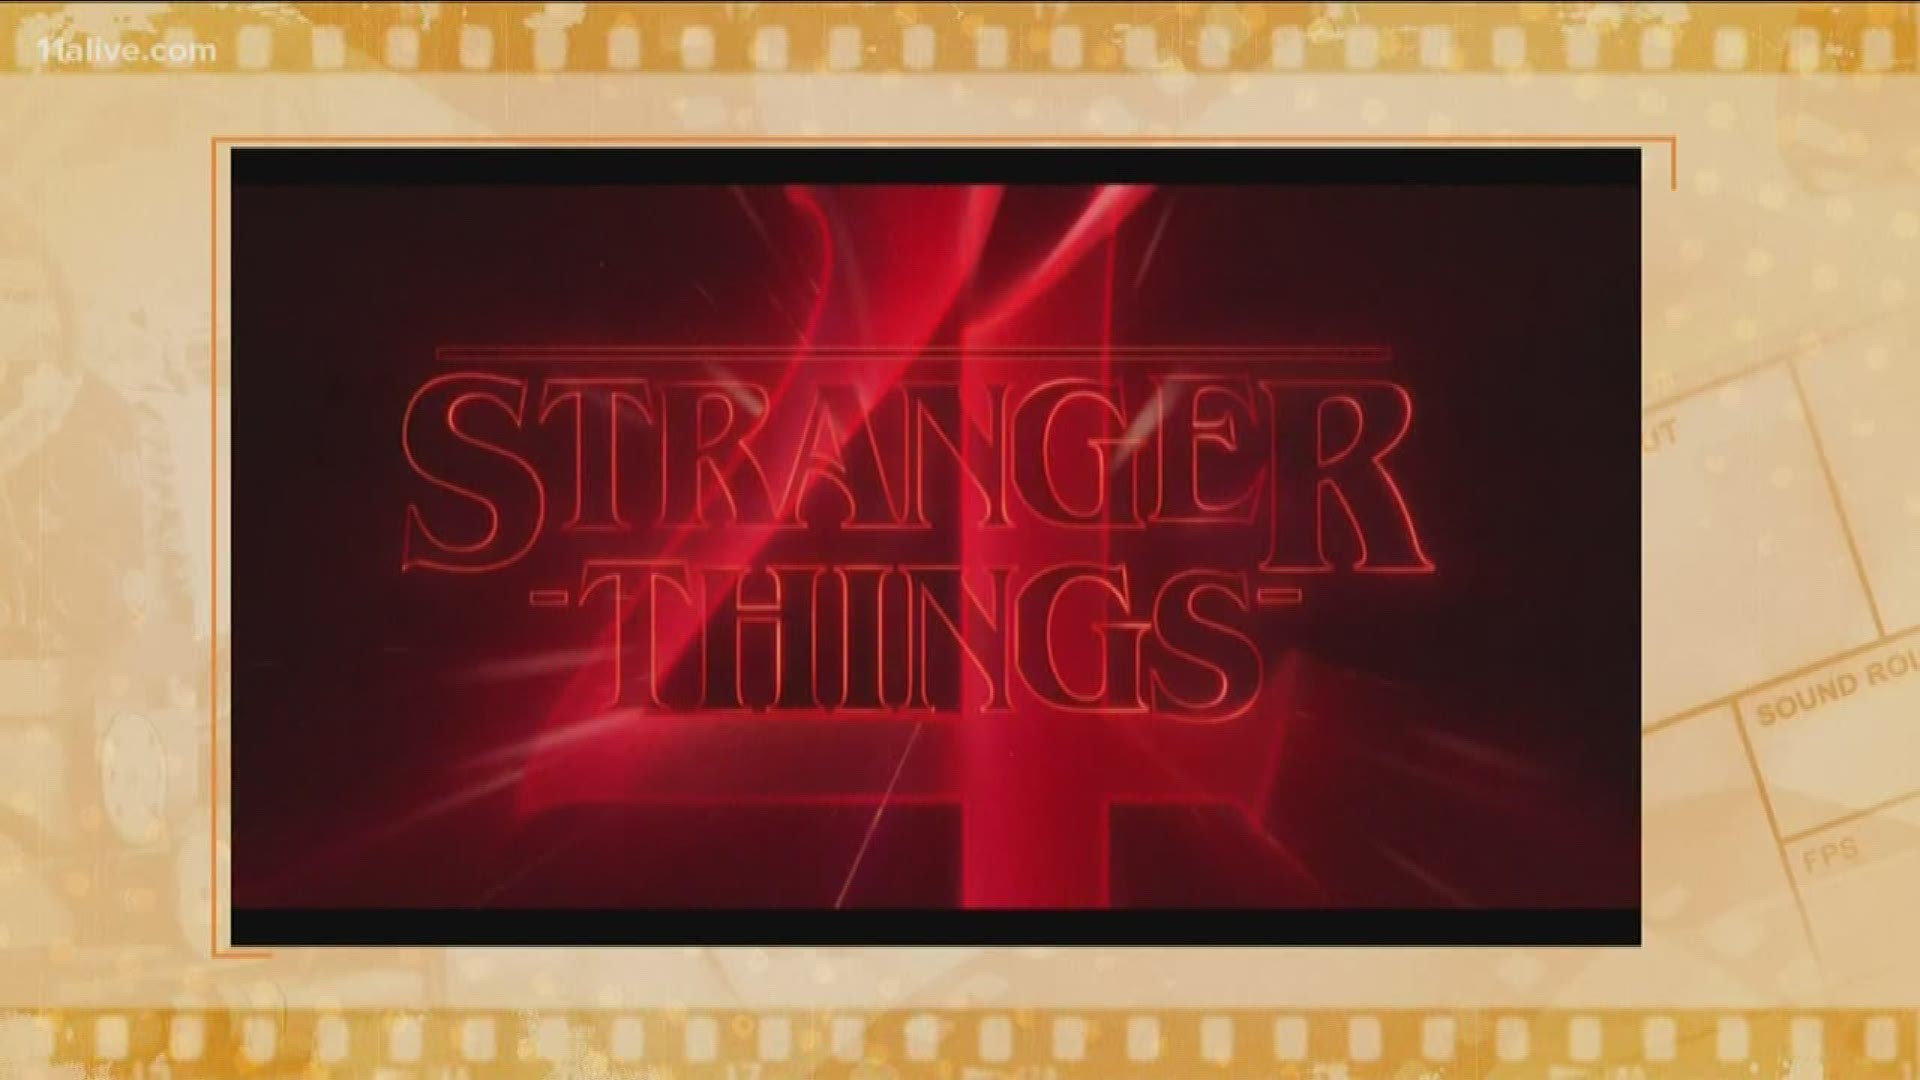 A teaser trailer announced 'Stranger Things 4' to the world on Monday.